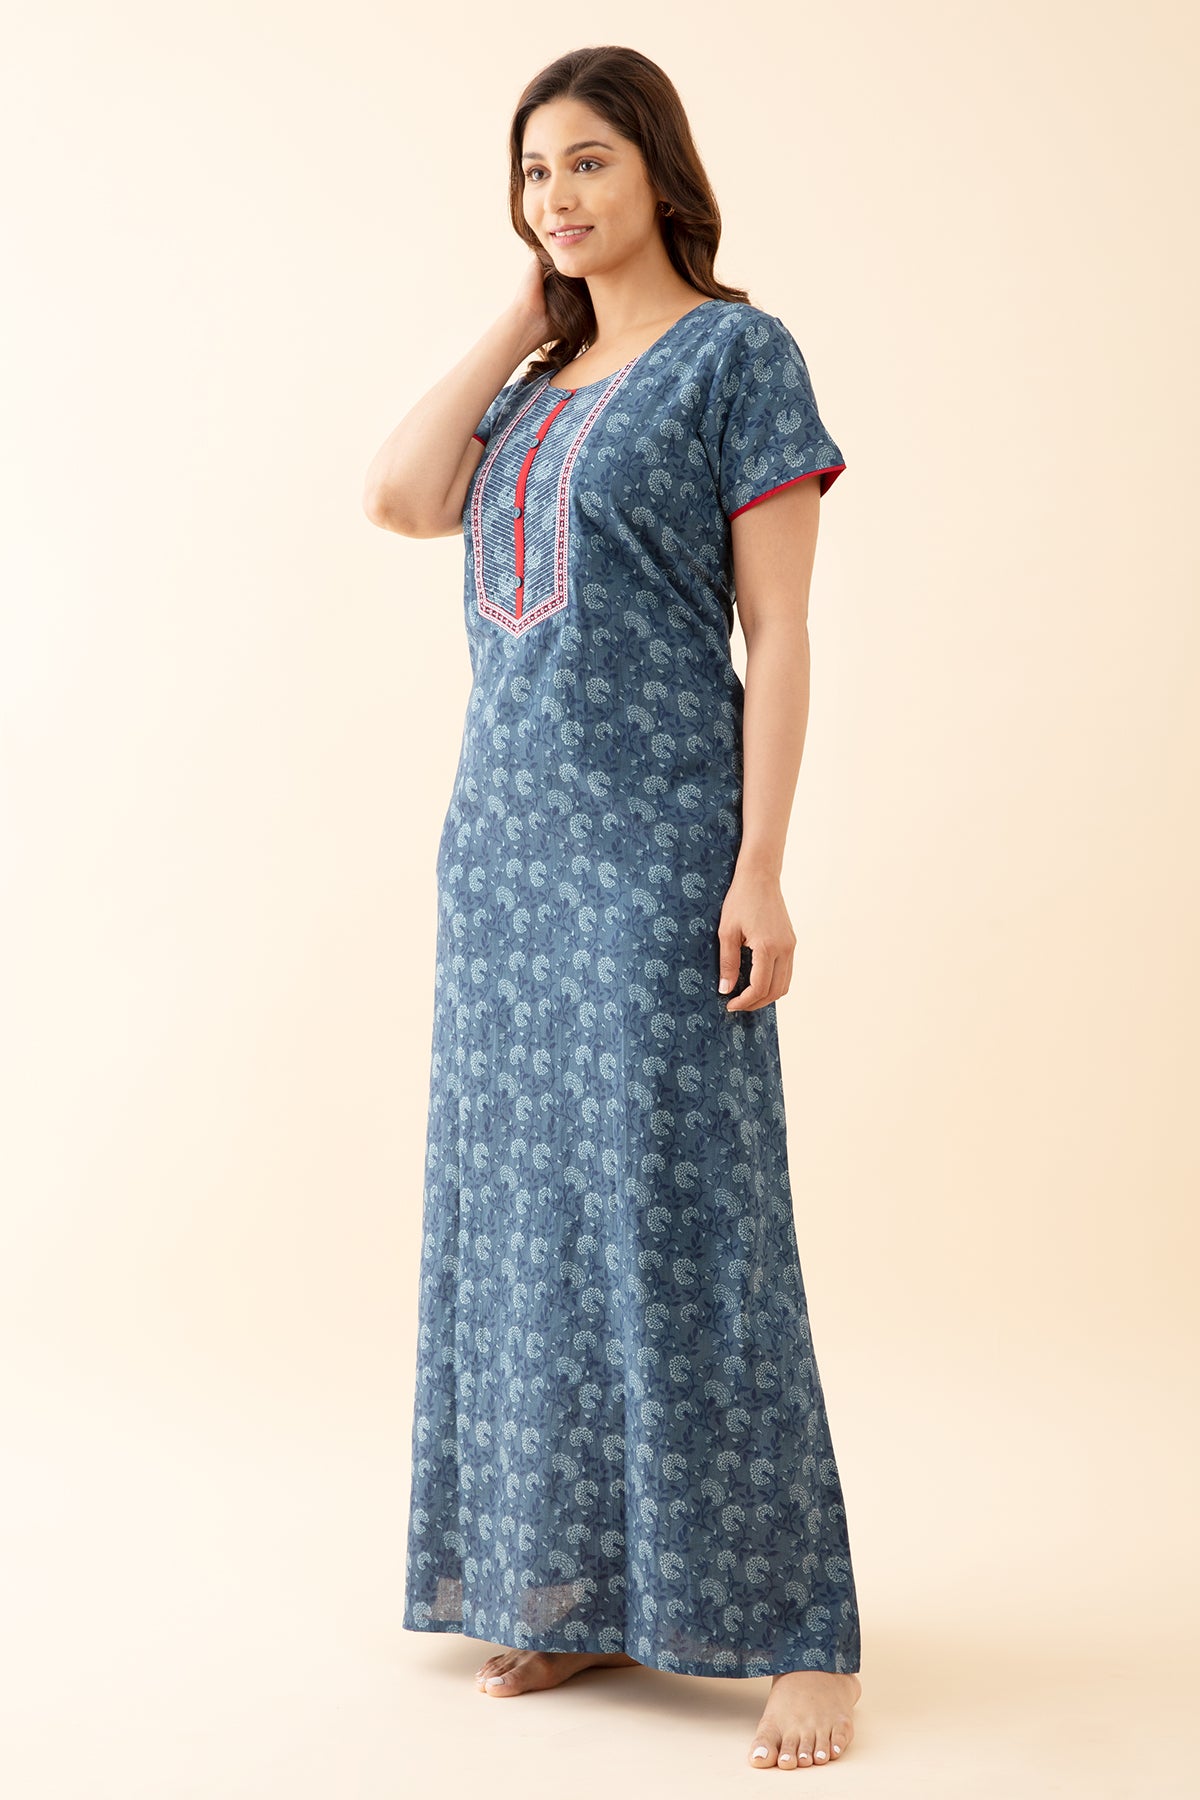 All Over Monochromatic Floral Printed Nighty with Embroidered Yoke - Blue